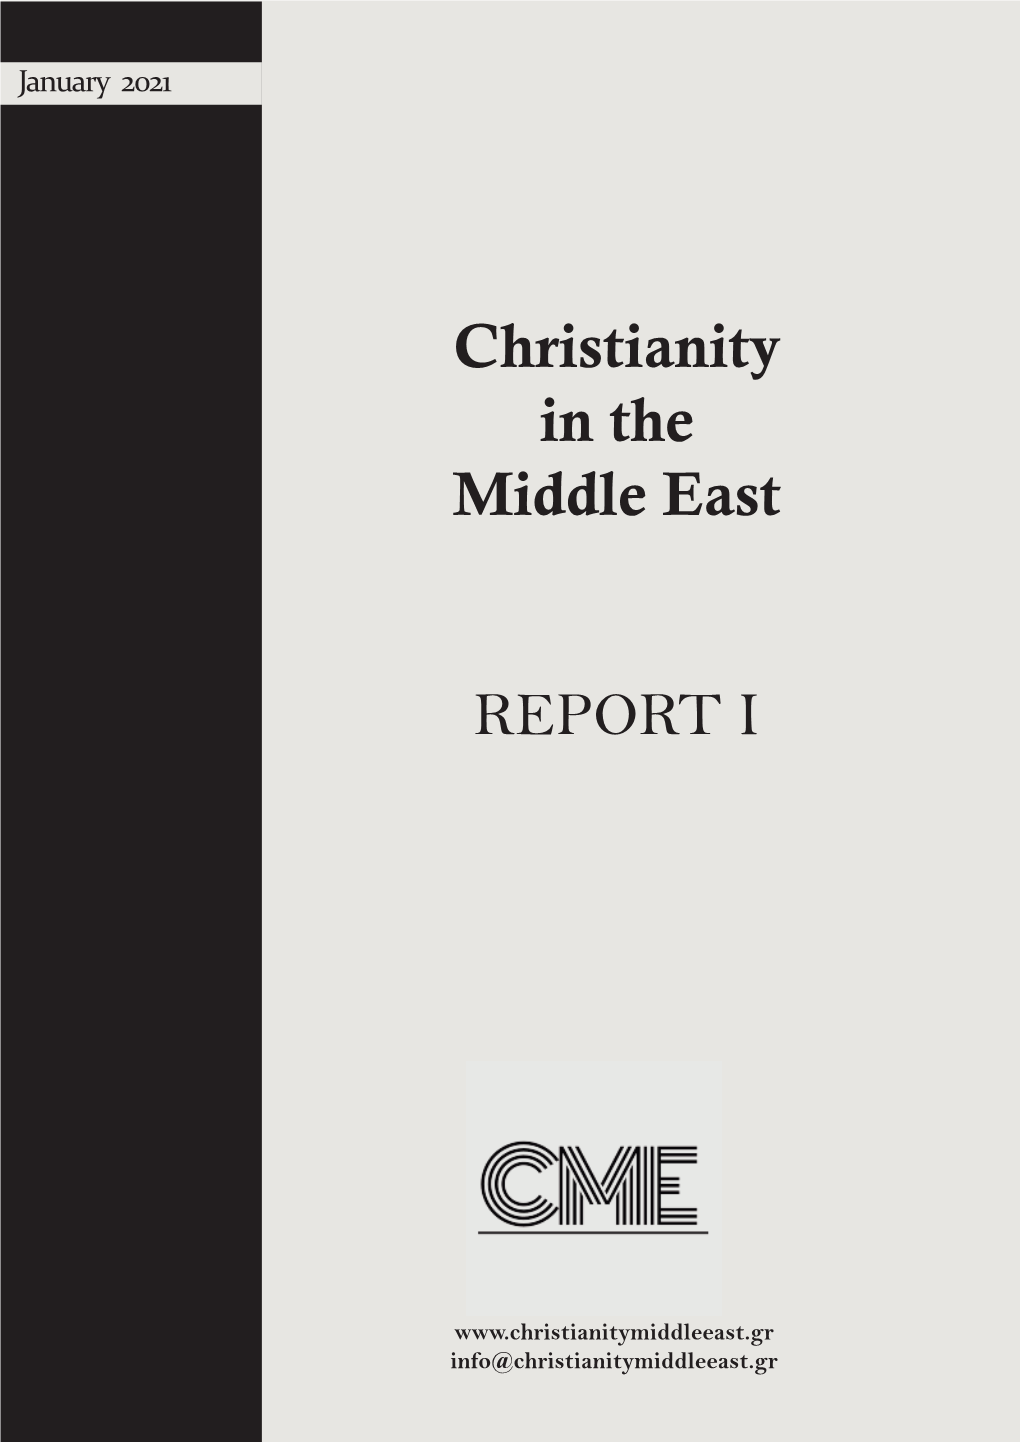 Christianity in the Middle East REPORT I